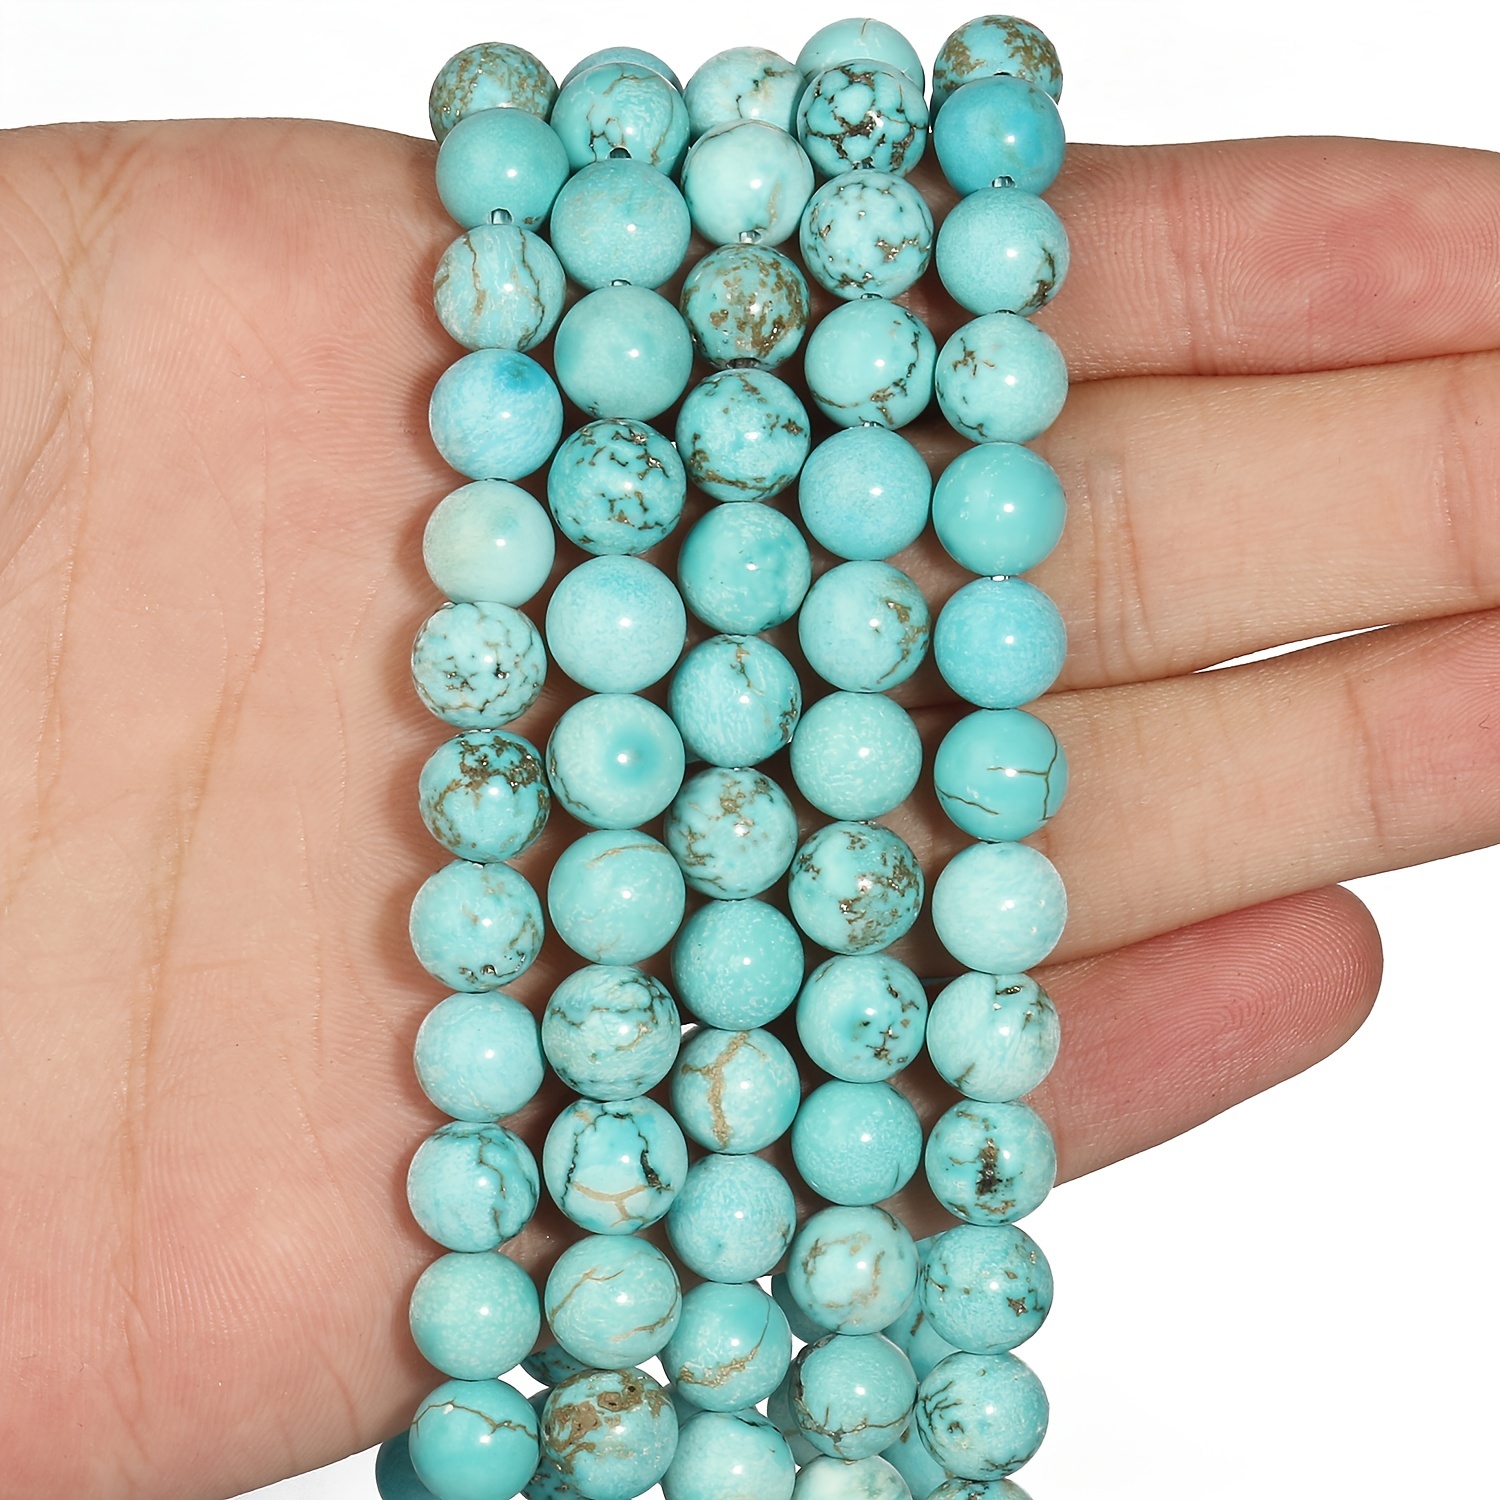 Natural Stone Turquoise Beads for Jewelry Making DIY Earrings Bracelet  Necklace 4/6/8/10/12mm Round Loose Spacer Beads 15 inches